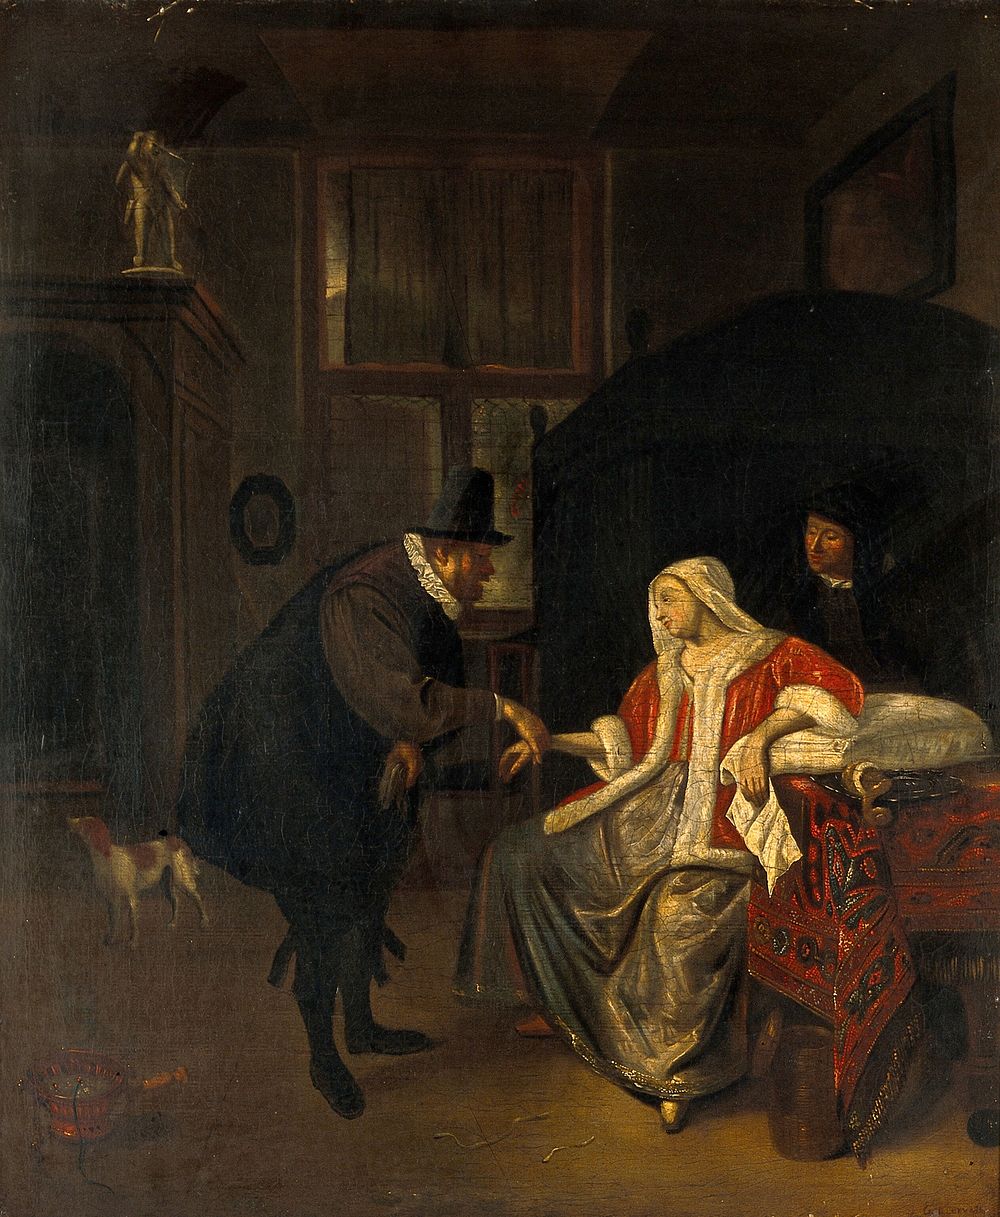 A physician taking the pulse of a lovesick girl. Oil painting after Jan Havicksz. Steen.